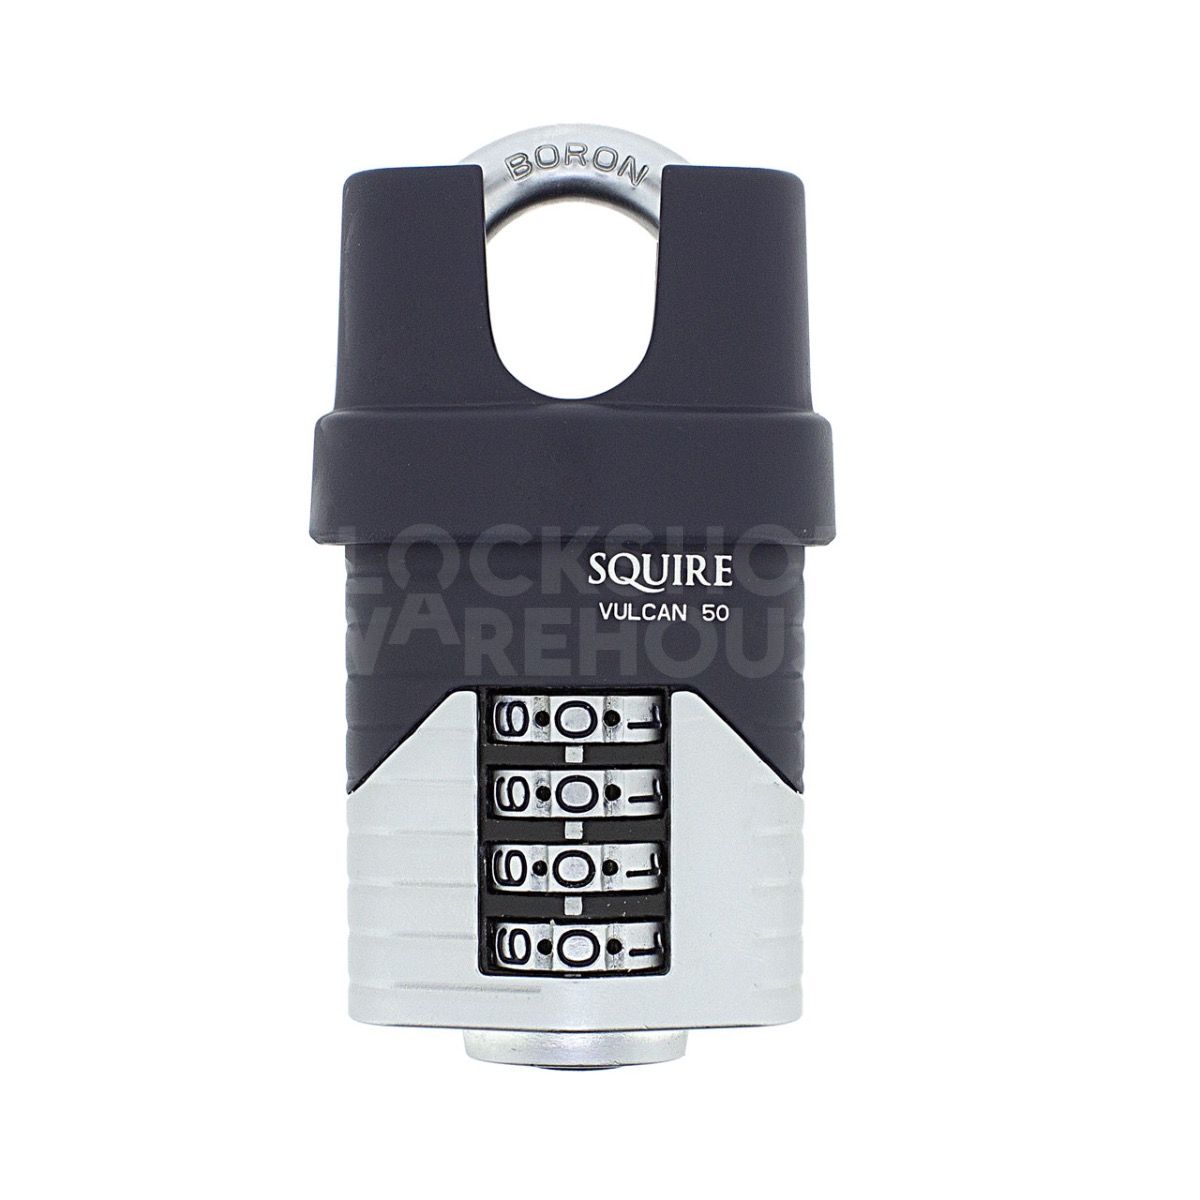 SQUIRE Vulcan 50mm Closed Shackle Combination Padlock - 4 Wheel